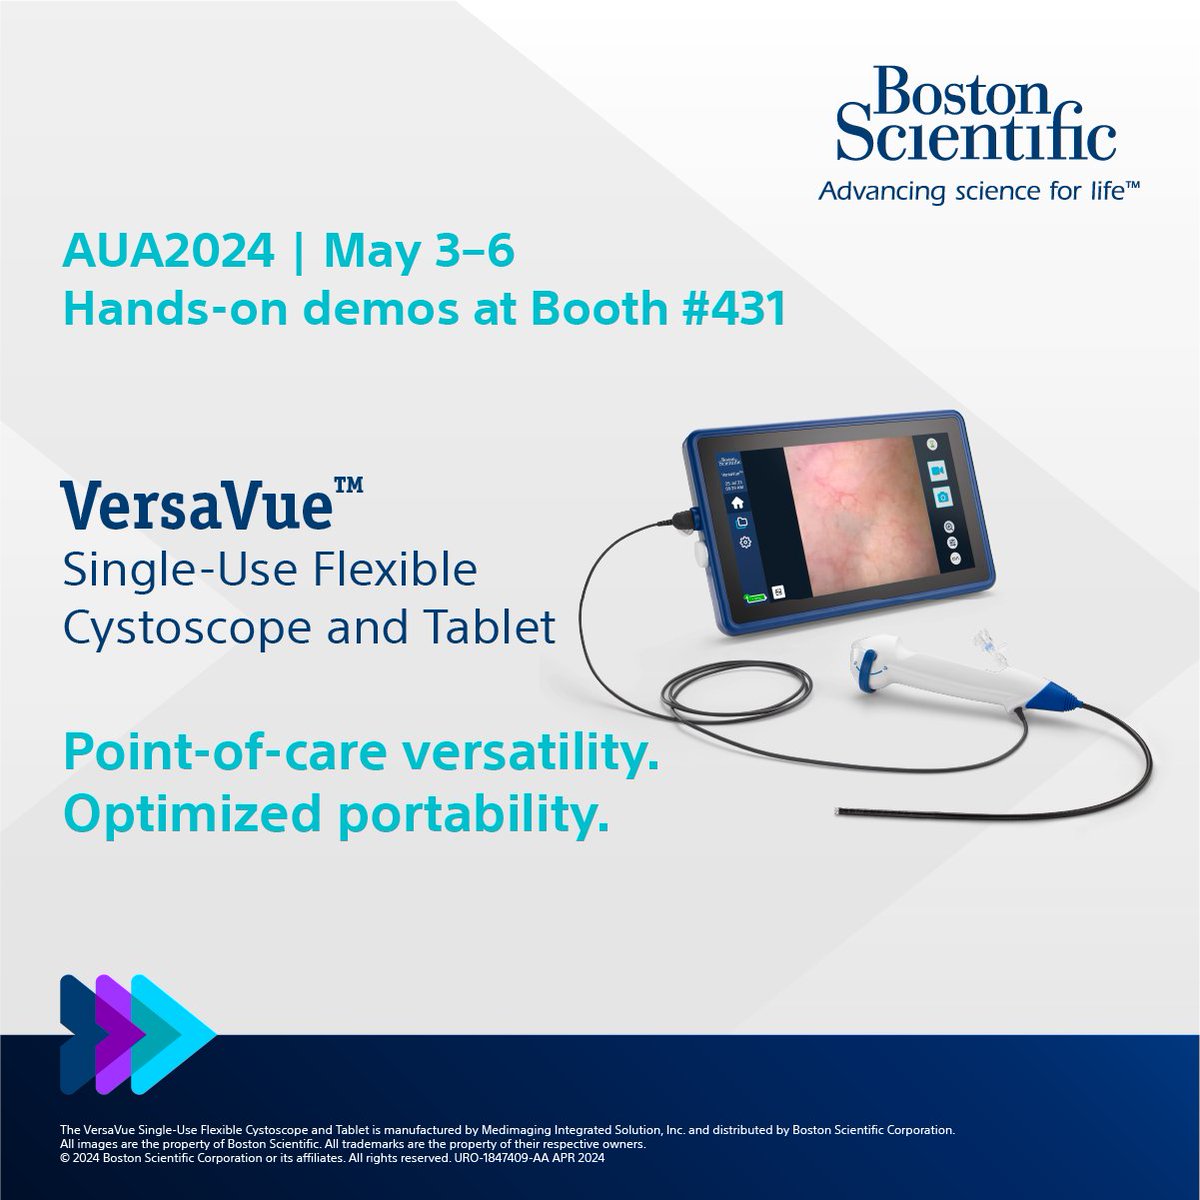 Be among the first to check out VersaVue at #AUA24! Get a demo of this single-use flexible cystoscope and tablet in Booth 431. See you there! bit.ly/3xGl3RM